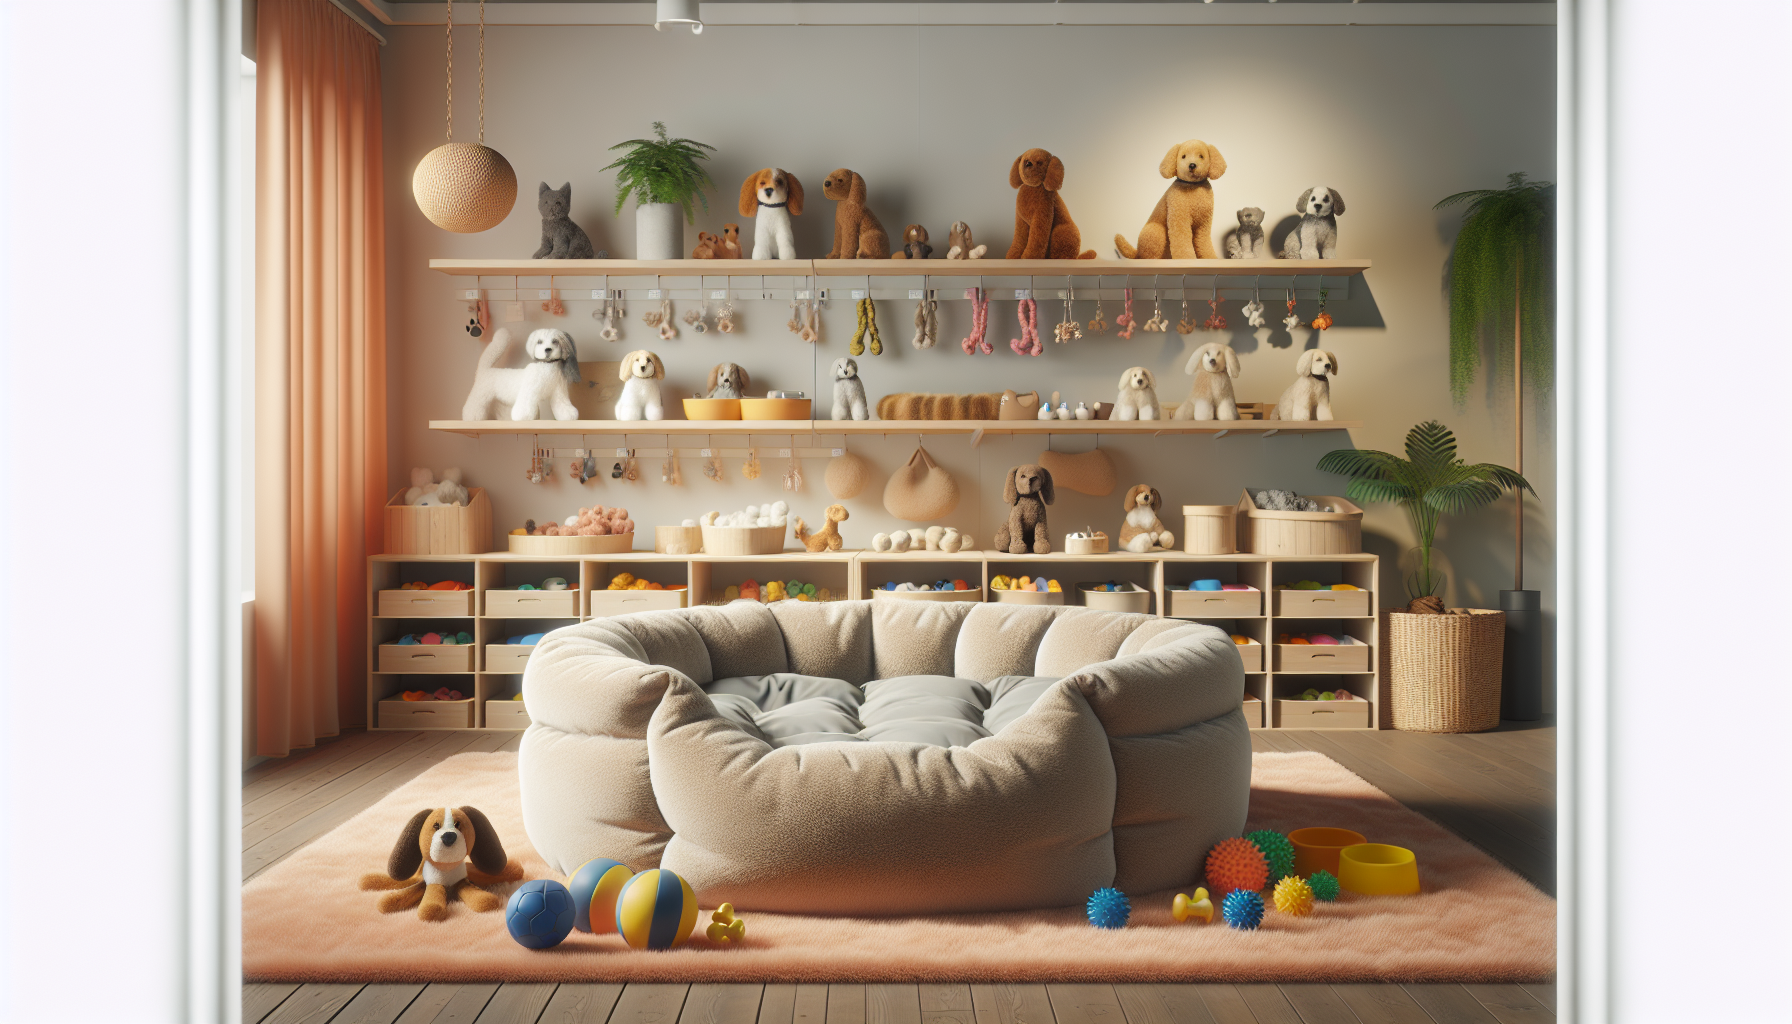 Does IKEA Have A Pet Area?